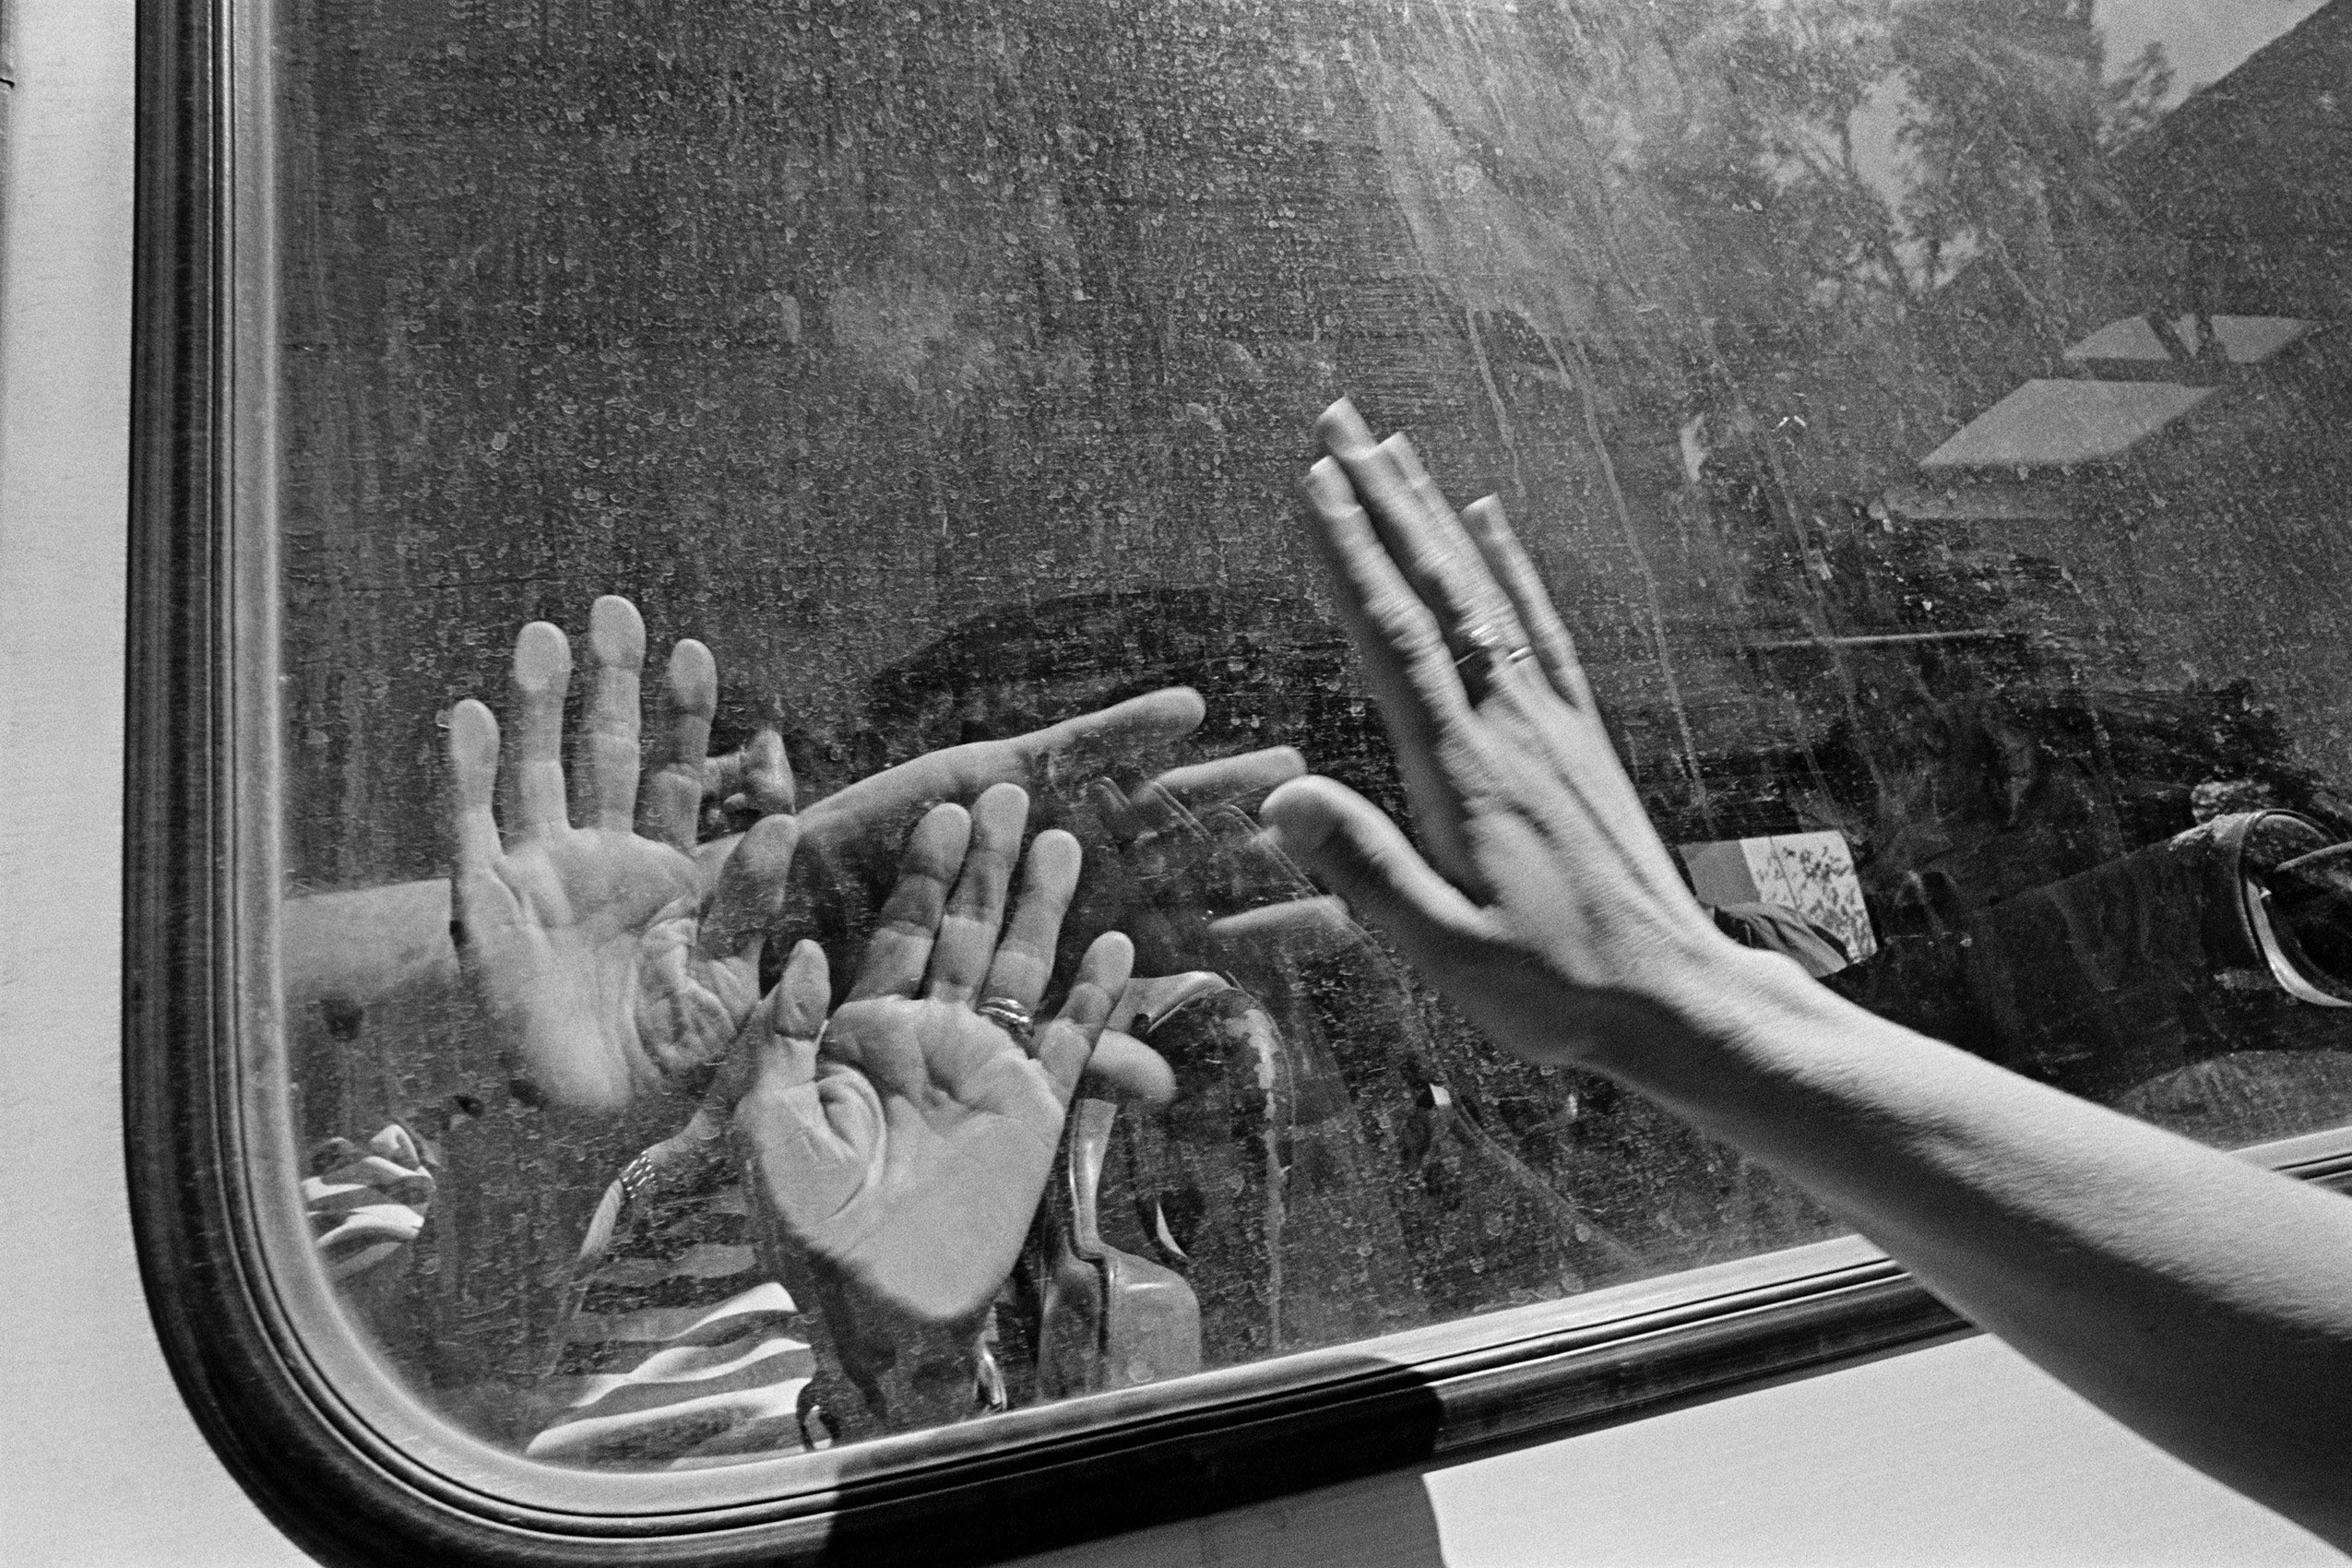 Hands pressed against a pane of glass meet hands on the other side.